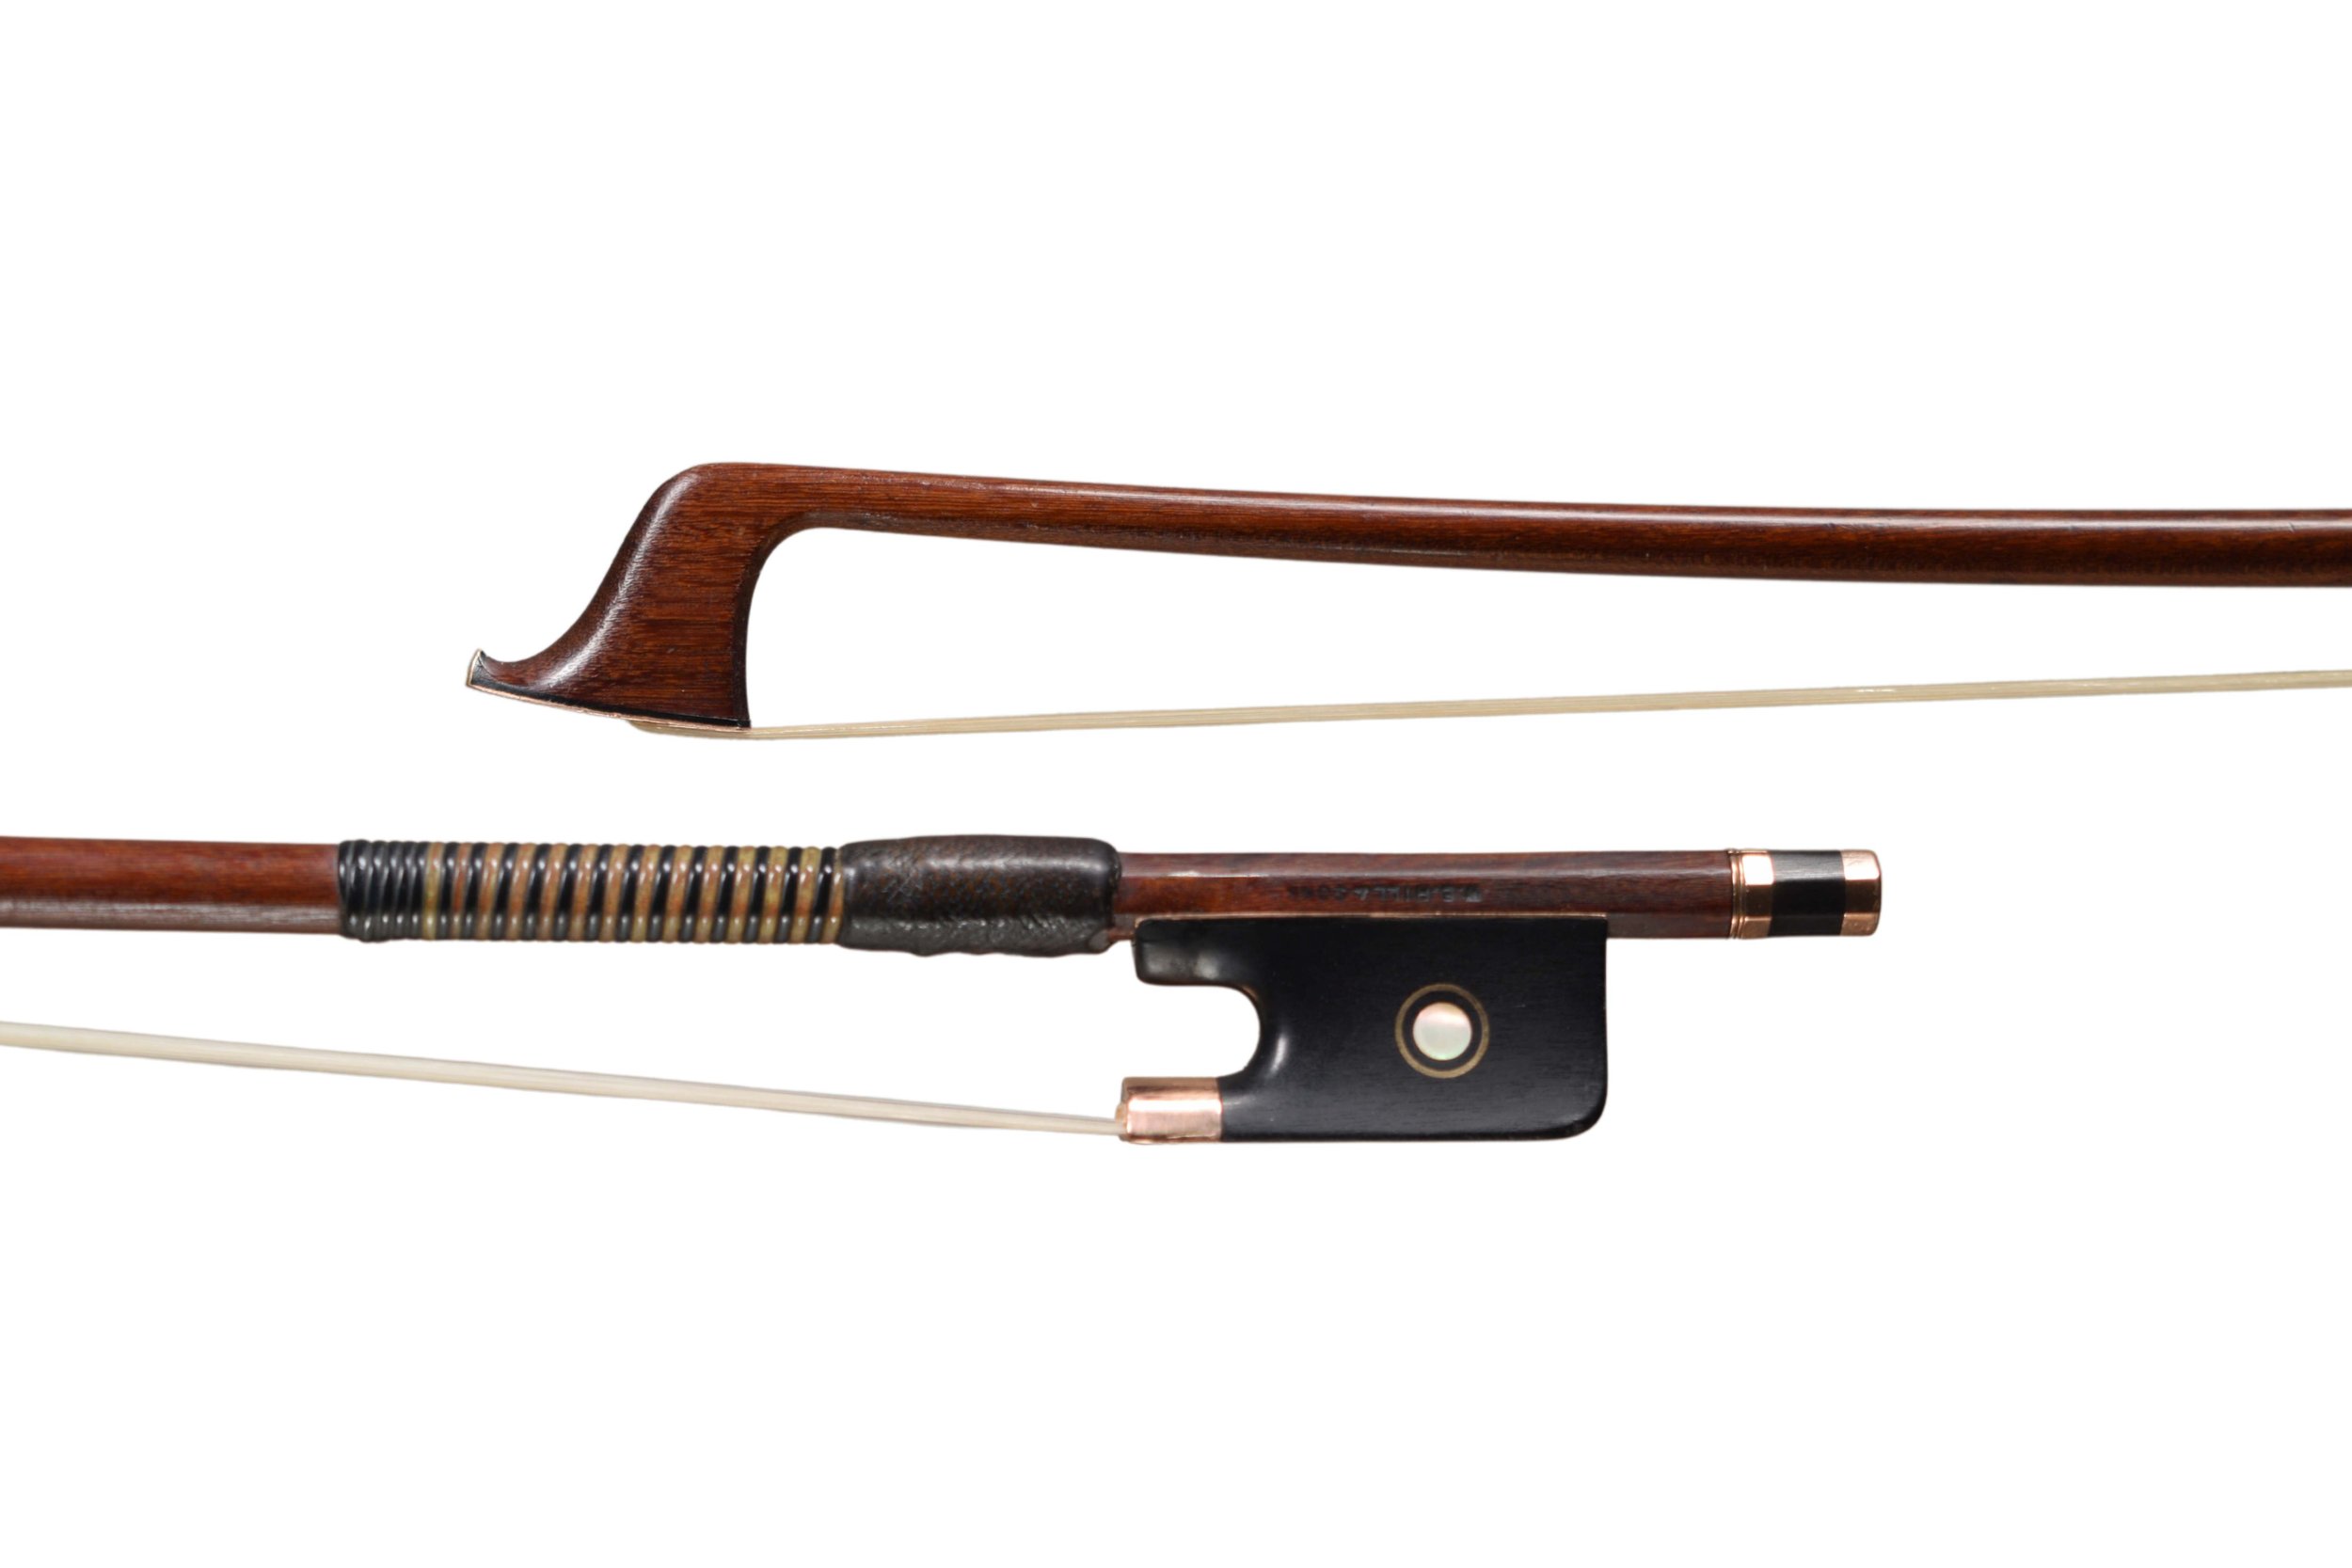 Frog and head of Hill cello bow showing gold mo...